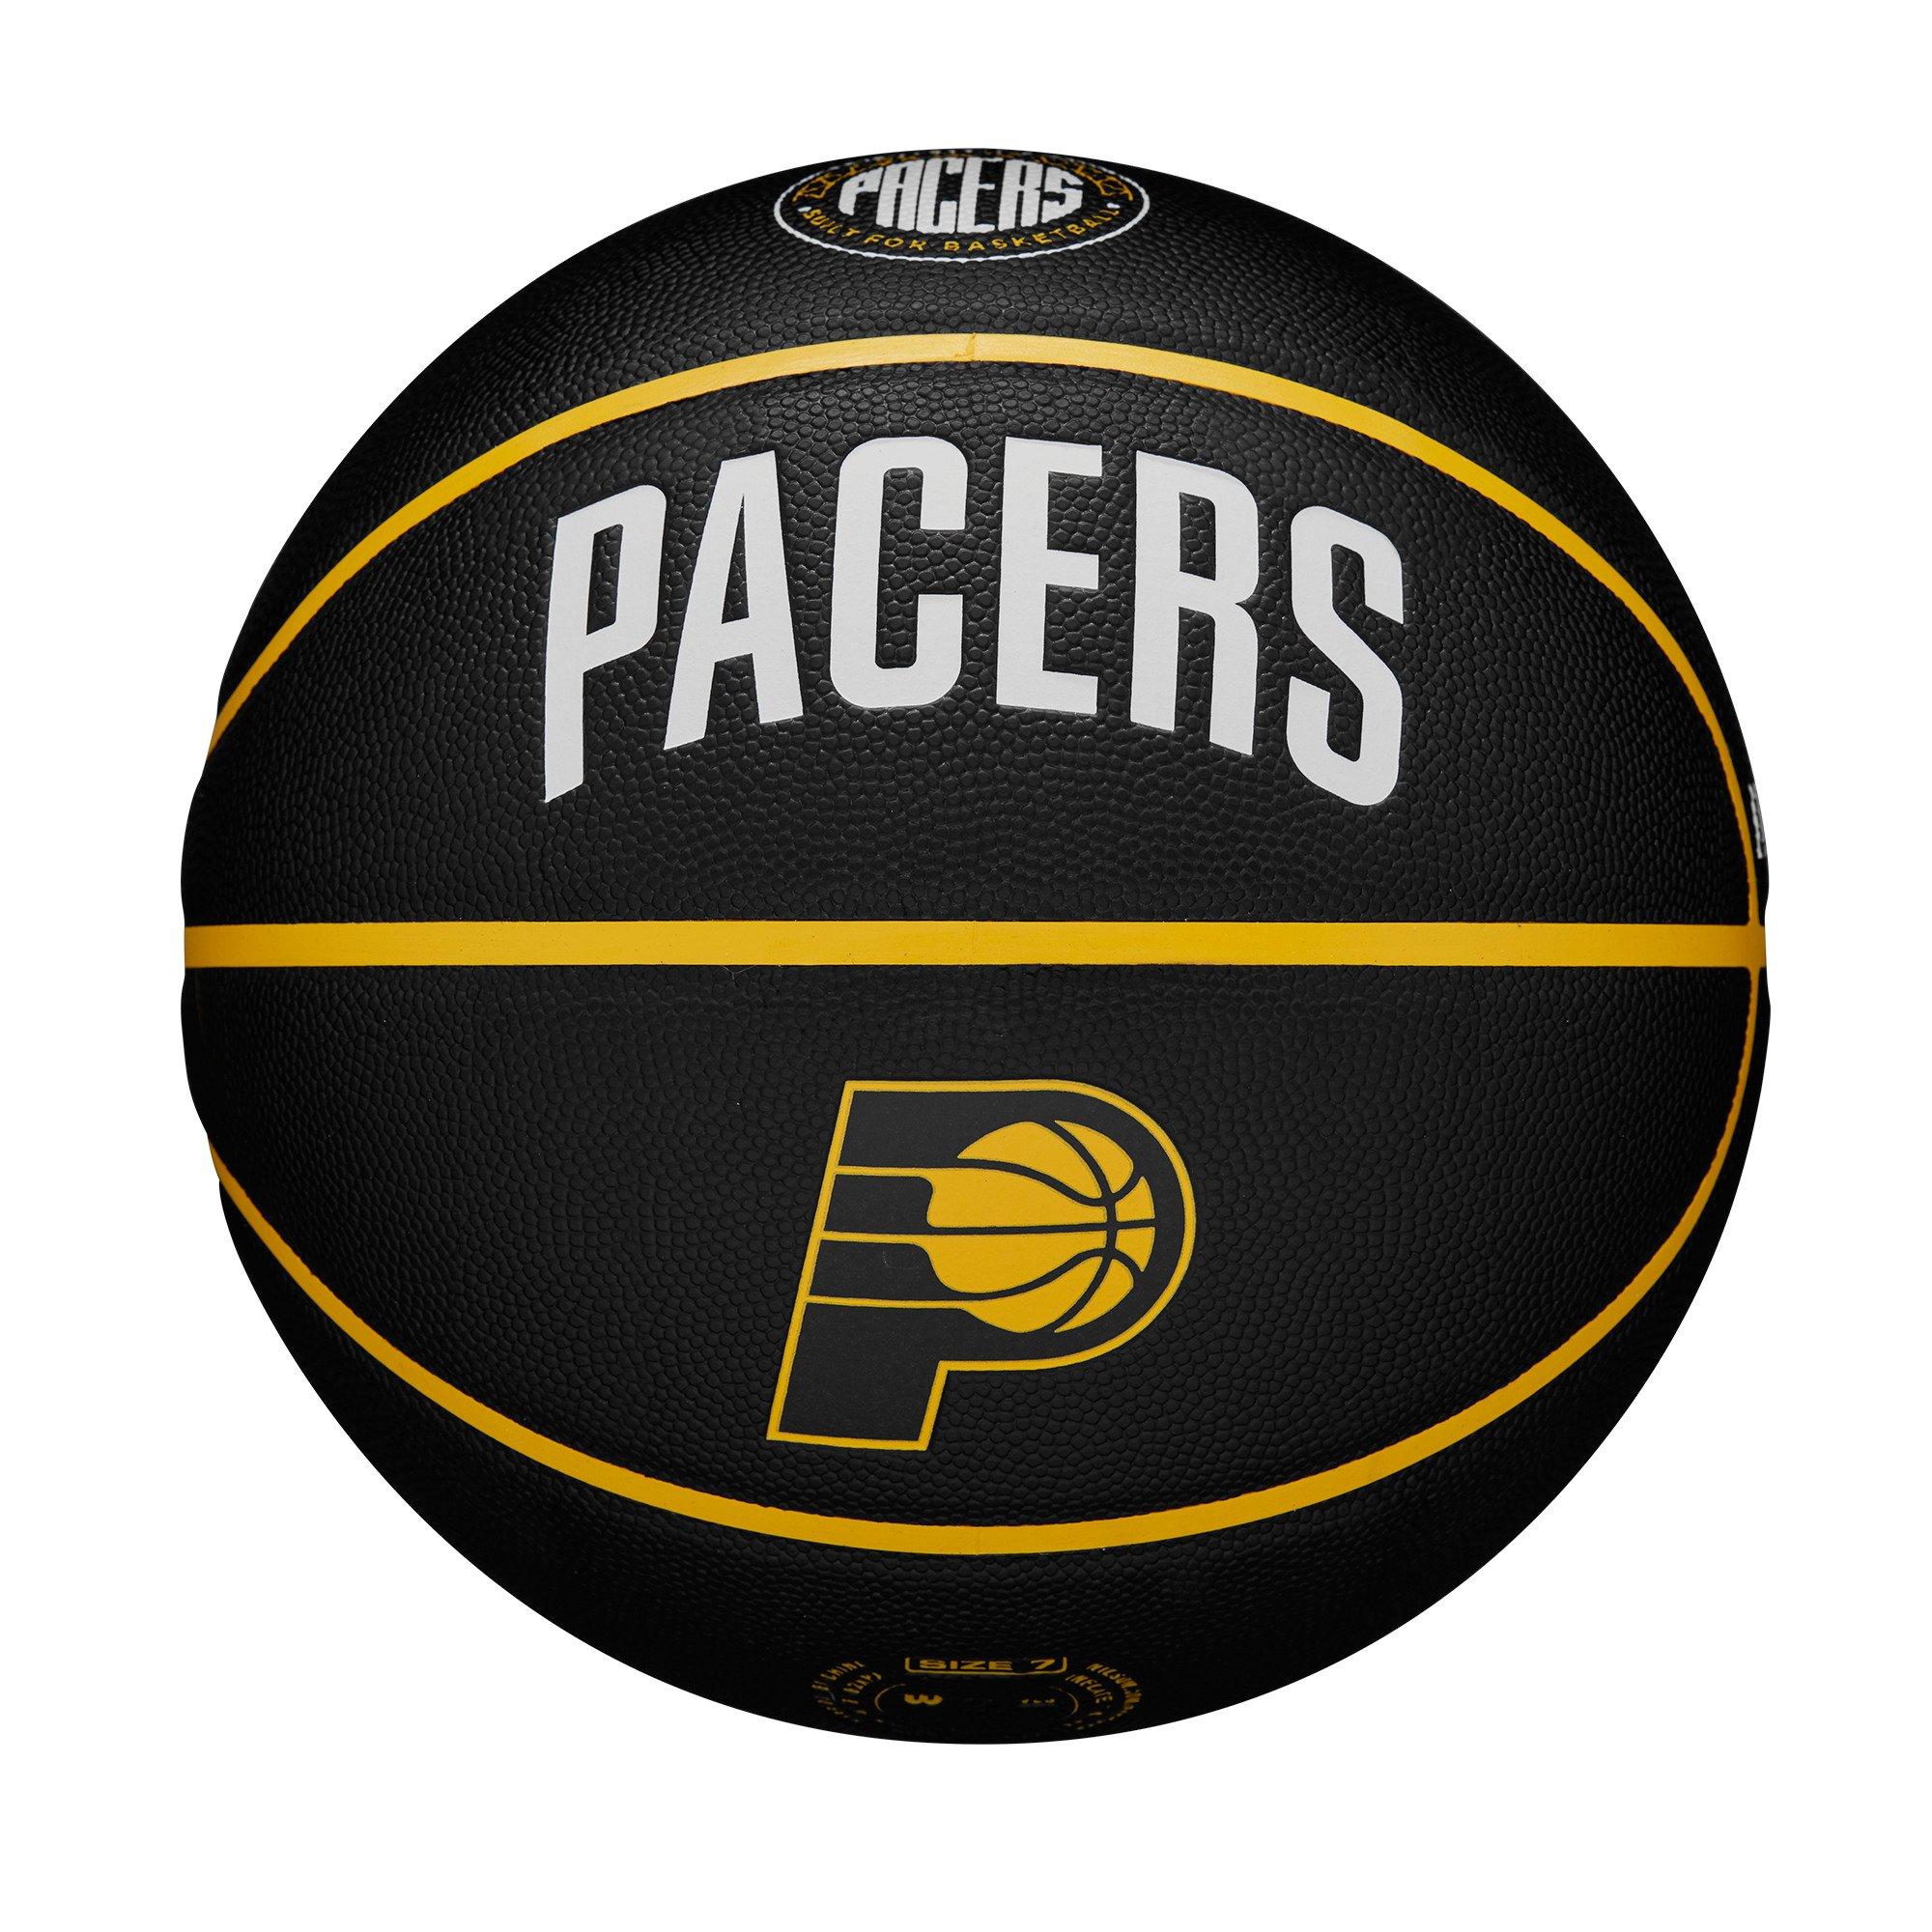 Indiana Pacers 22/23 City Edition Uniform: Built for Basketball